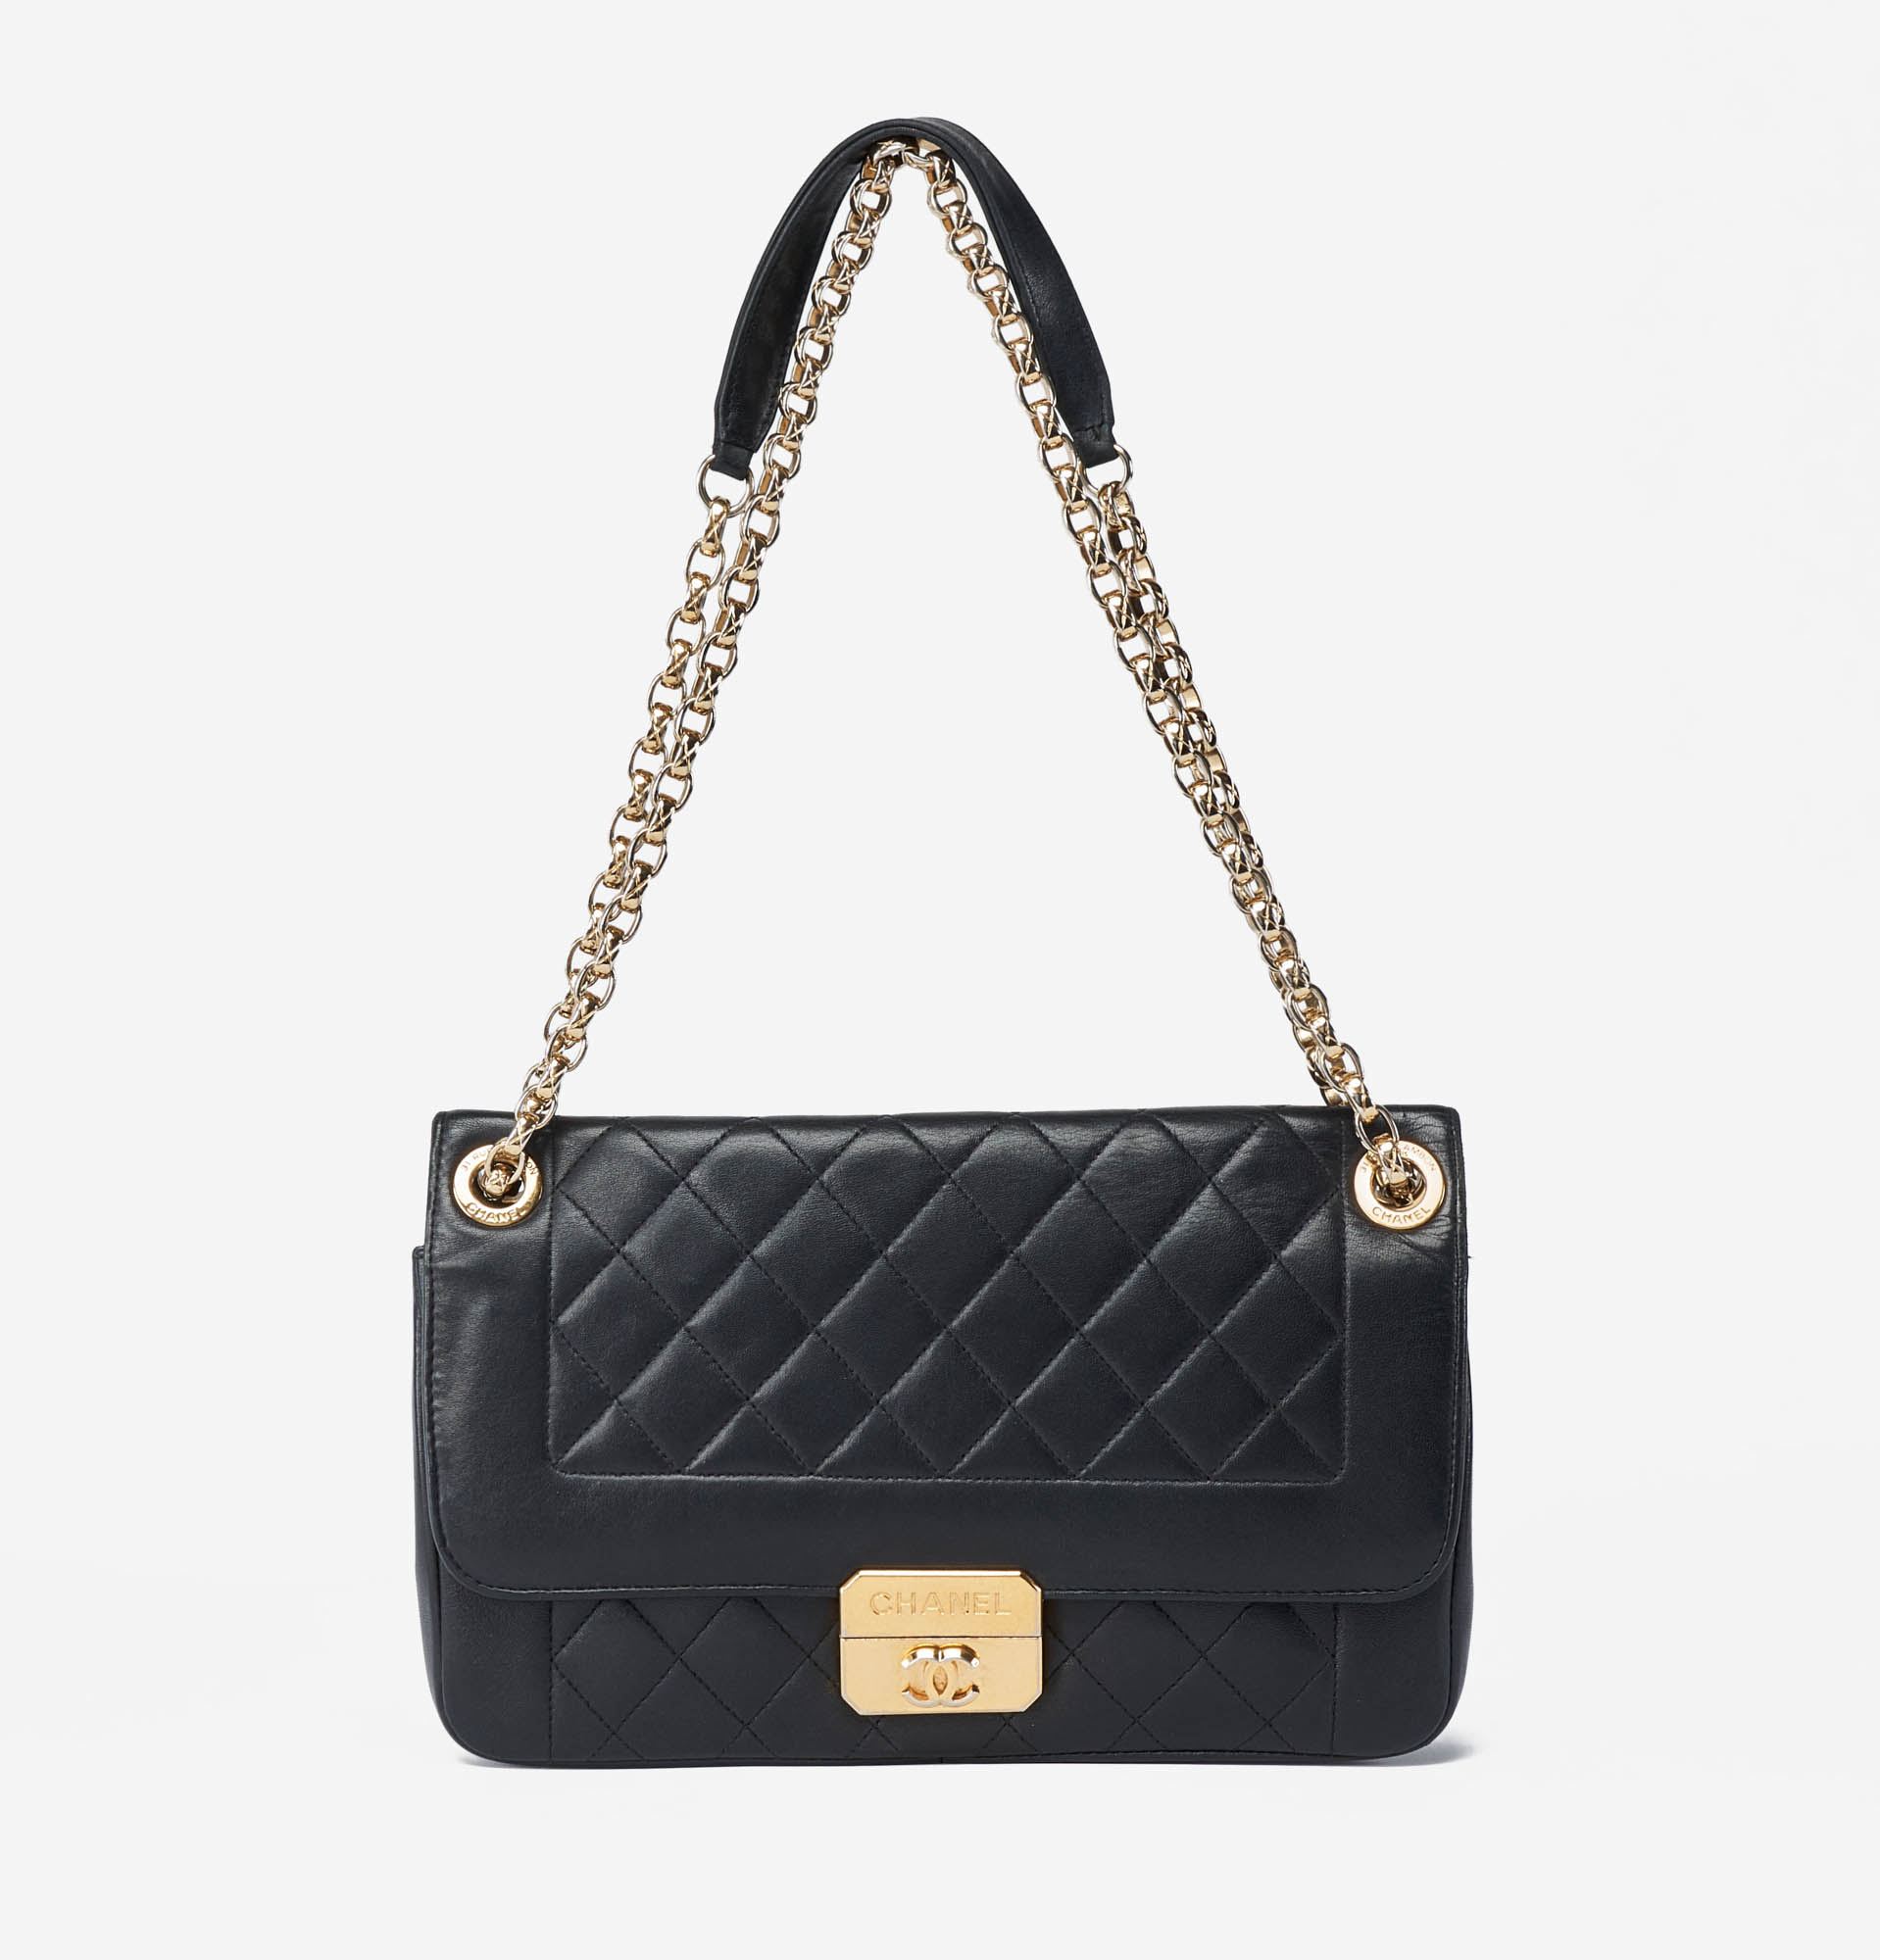 Chanel Chic With Me Calf Black